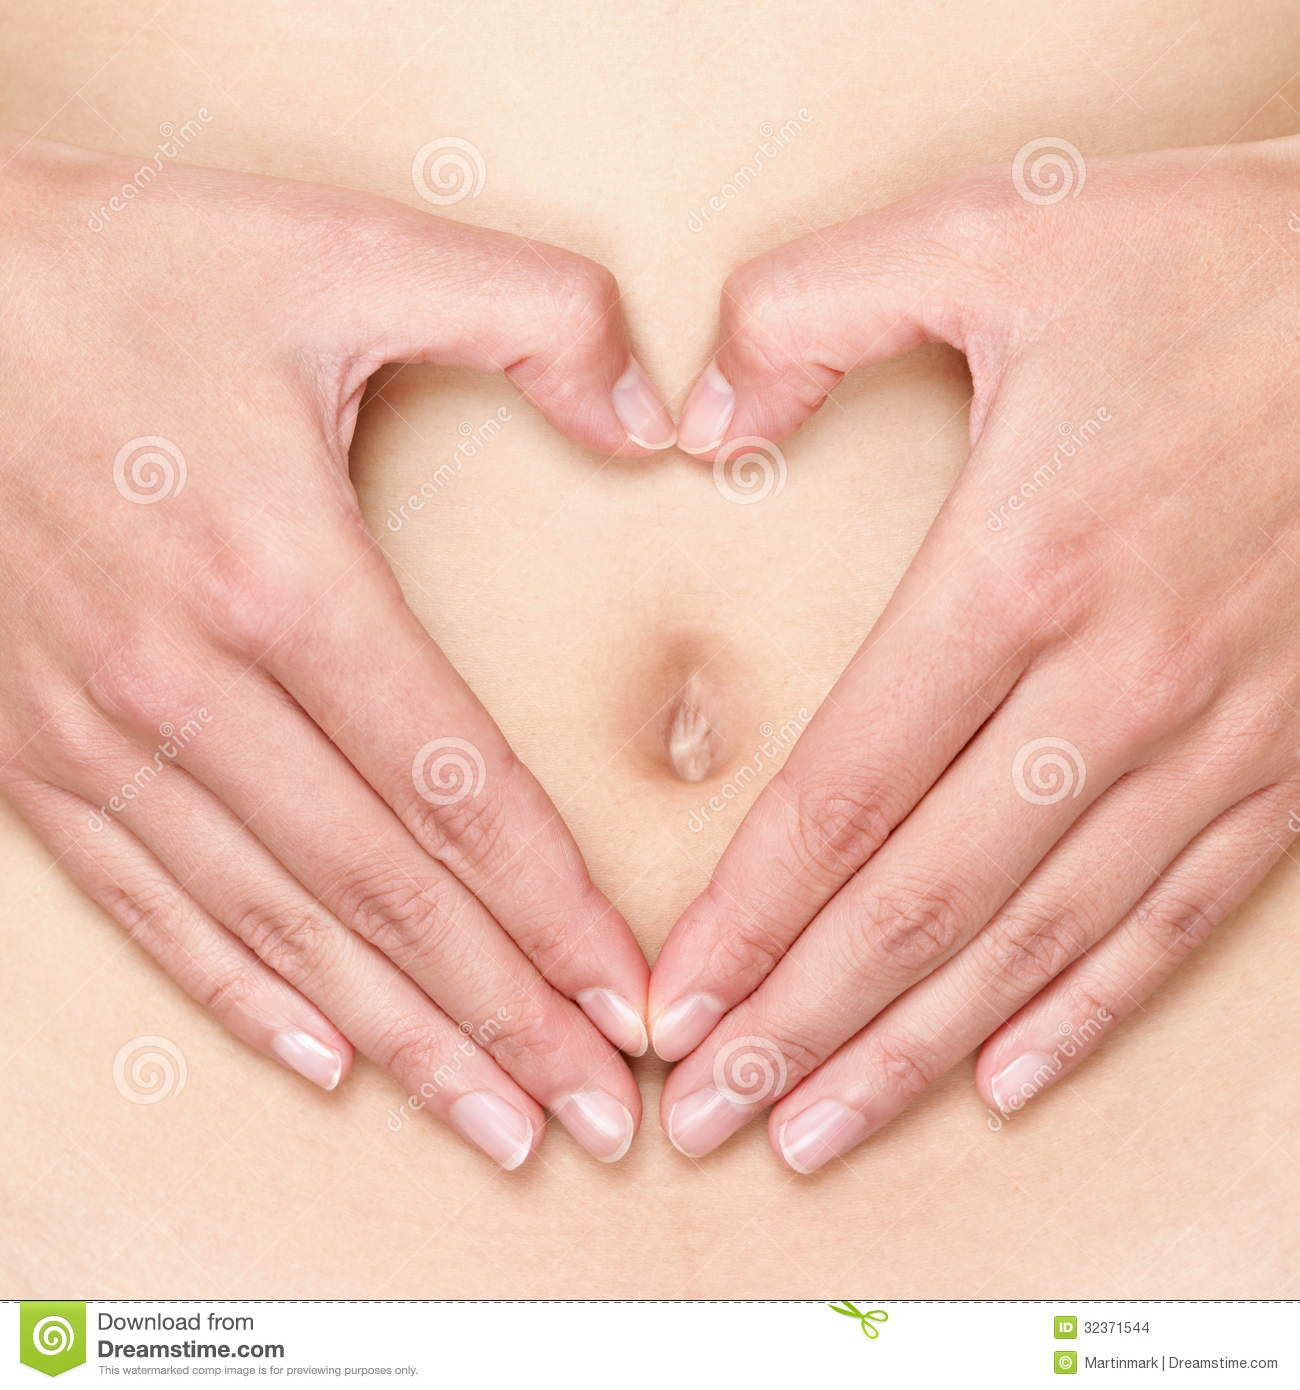 pregnant-woman-pregnancy-concept-heart-stomach-hands-forming-female-belly-button-healthy-health-32371544